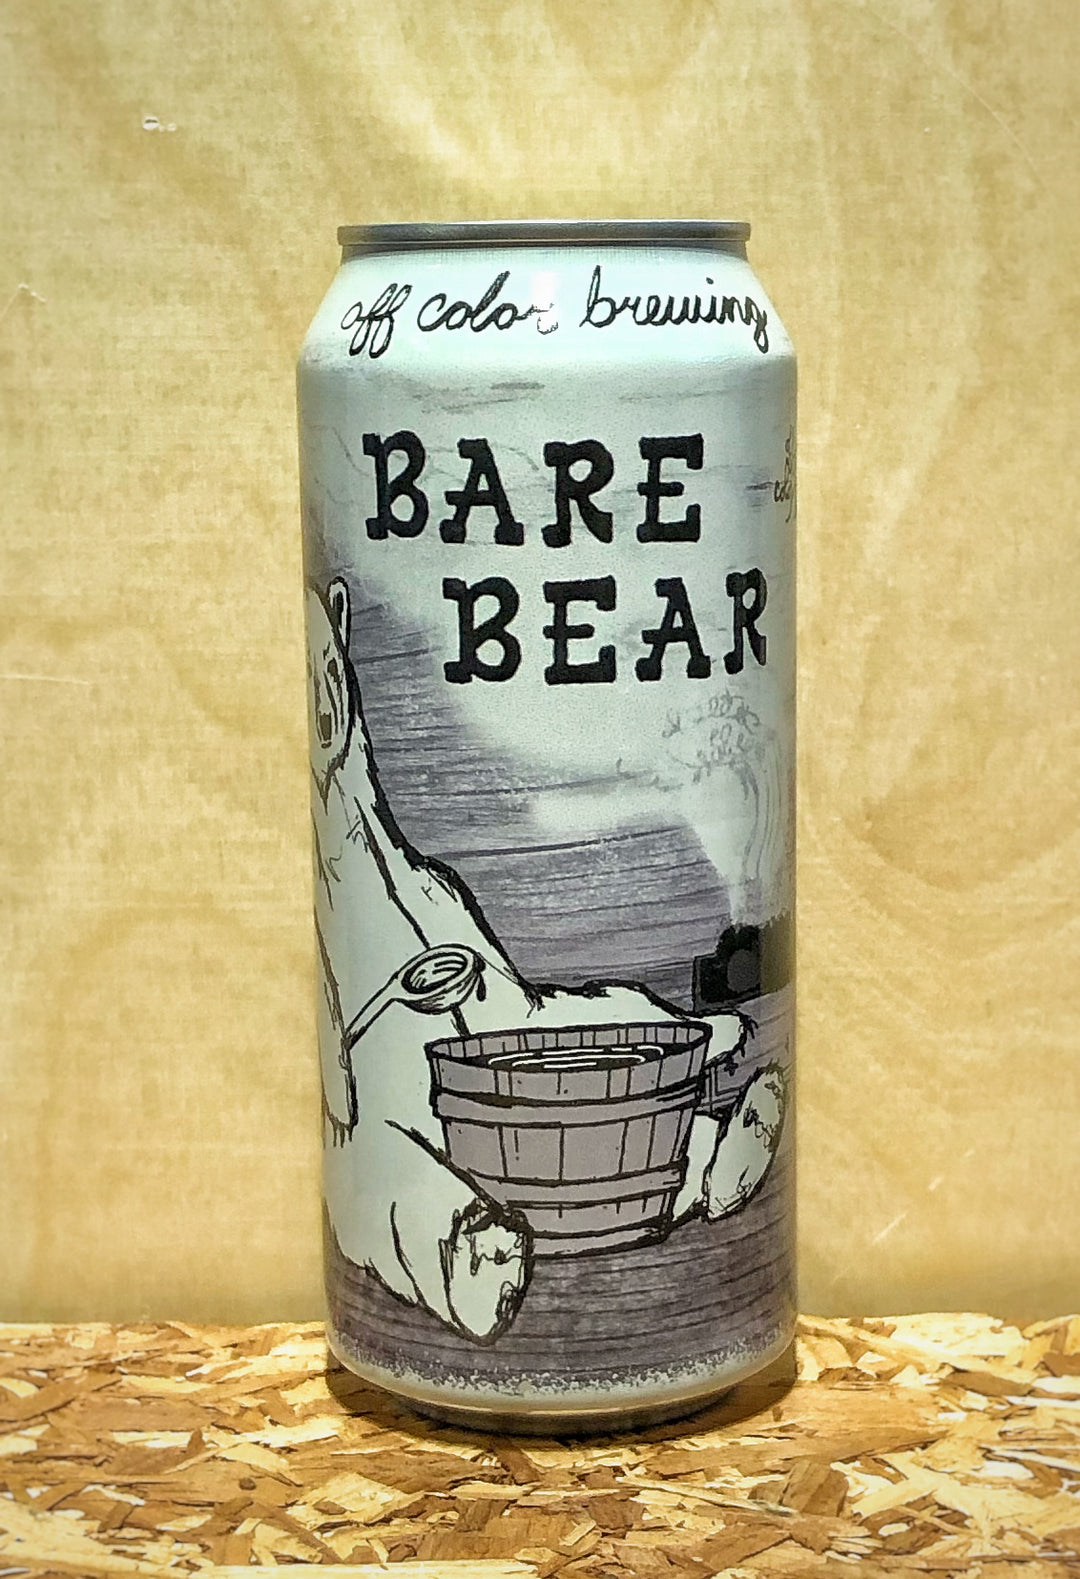 Off Color Brewing 'Bare Bear' Rye Beer Brewed with Juniper Berries (Chicago, IL)